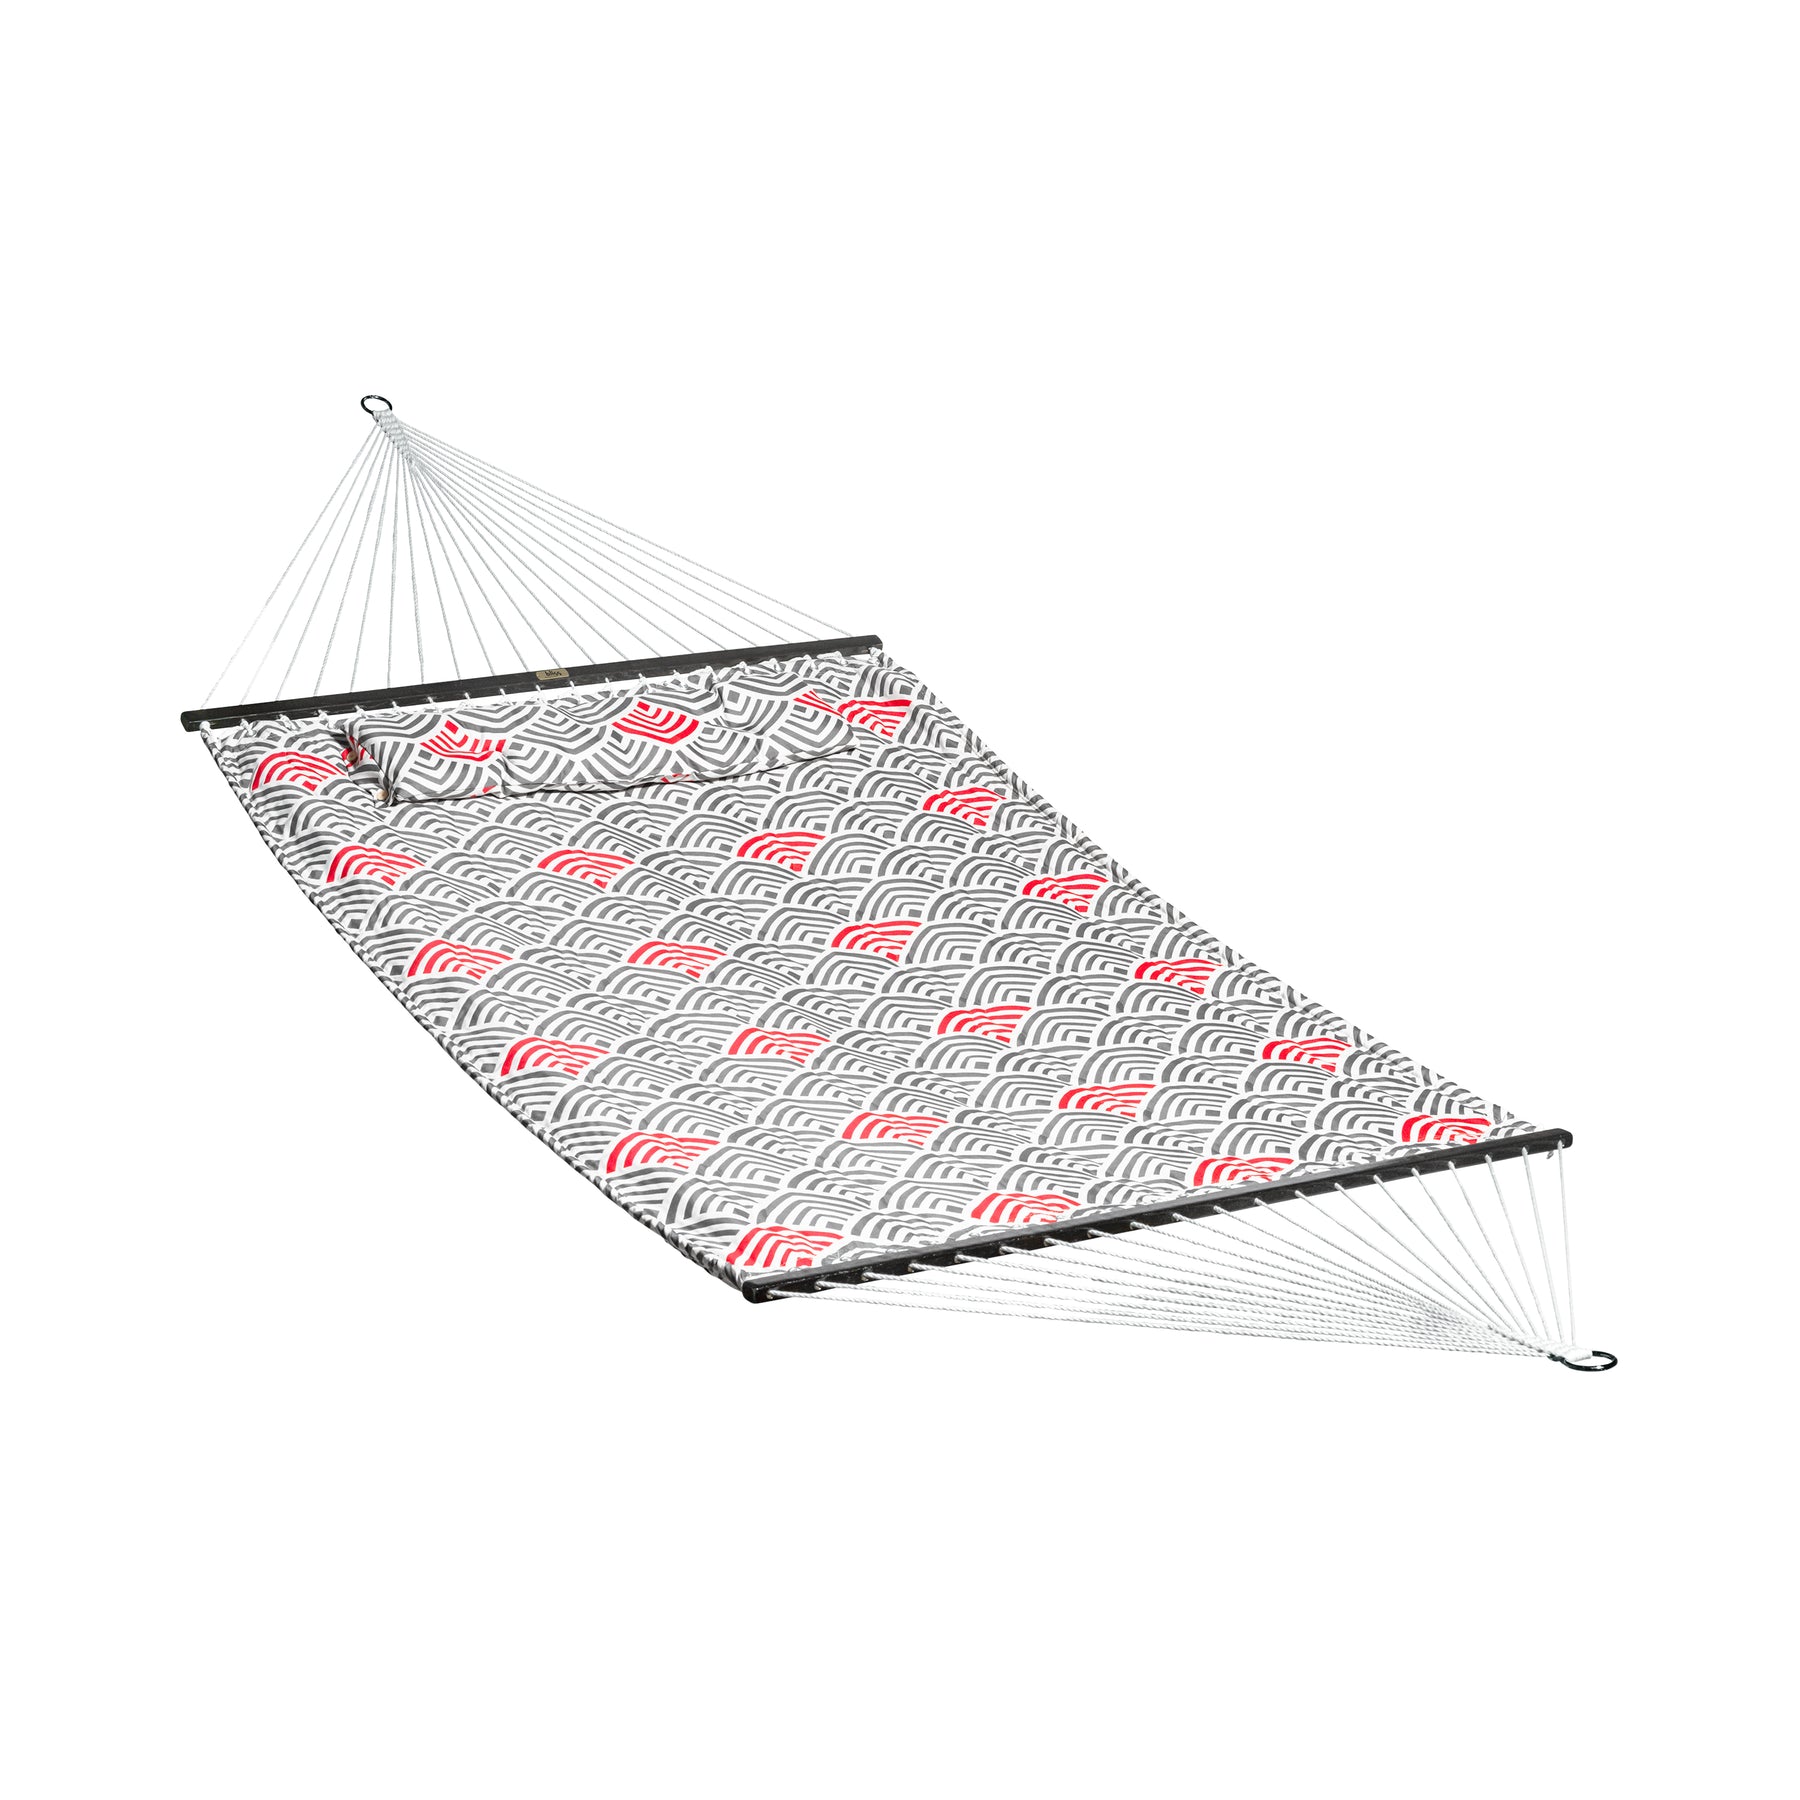 Bliss Hammocks 55-inch Wide 2-Person Reversible Quilted Hammock with Spreader Bars and Pillow in the tonal arches red and gray variation.